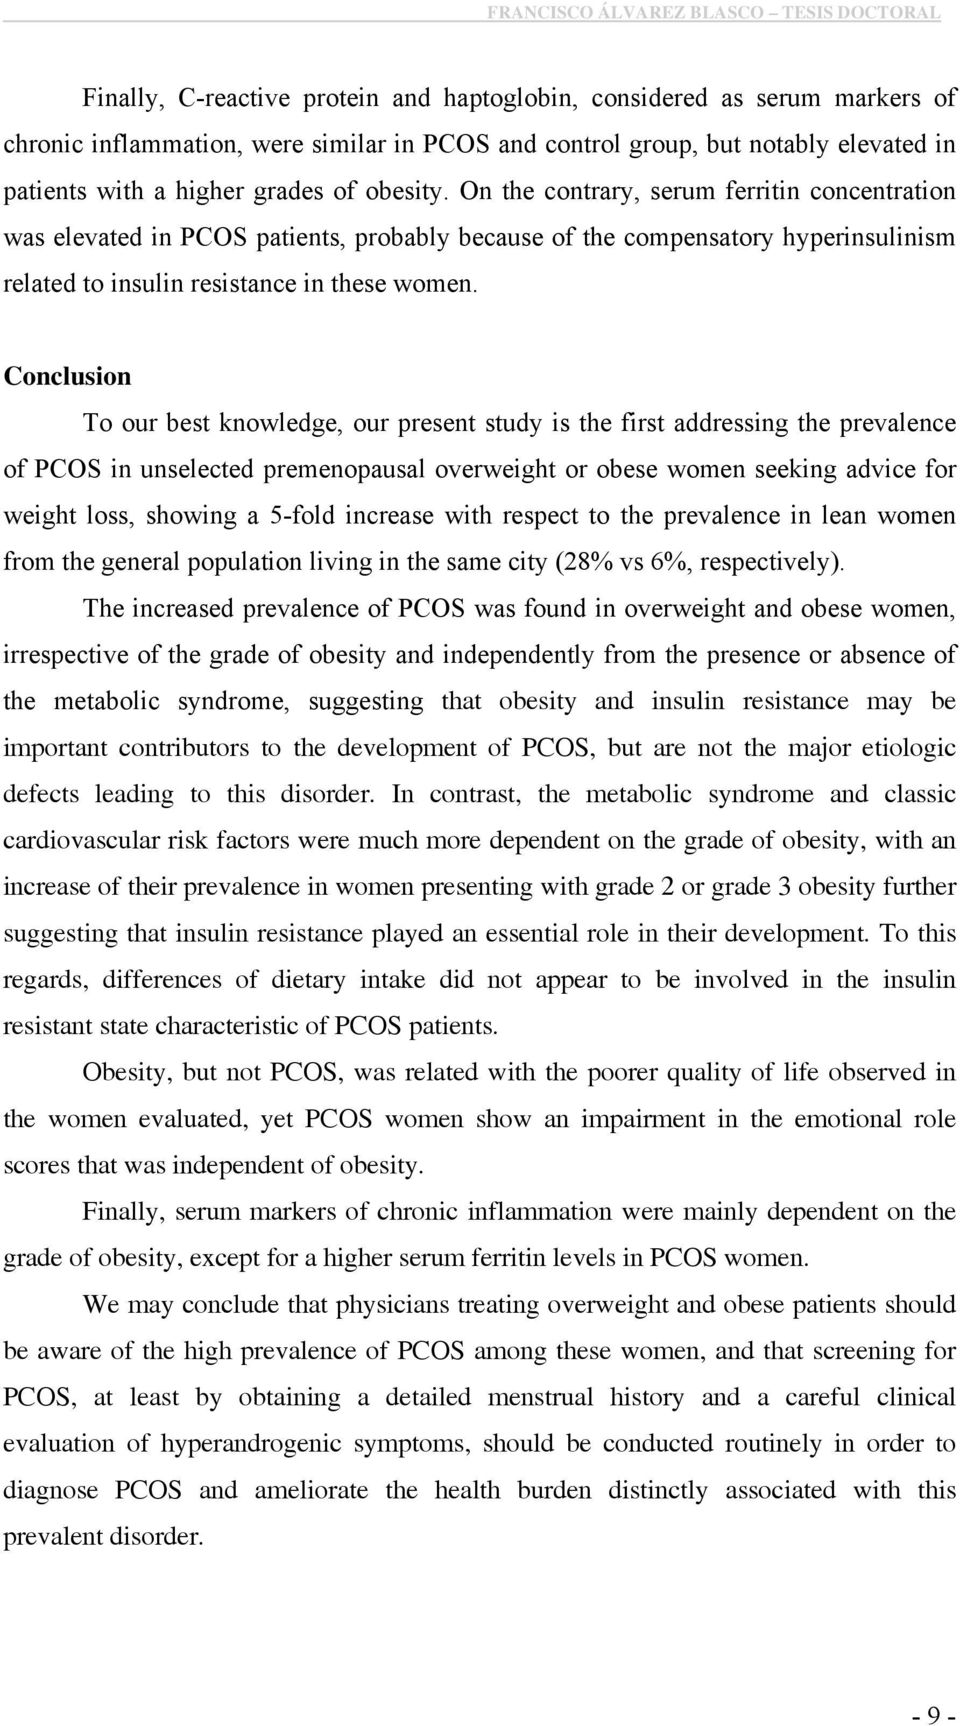 On the contrary, serum ferritin concentration was elevated in PCOS patients, probably because of the compensatory hyperinsulinism related to insulin resistance in these women.